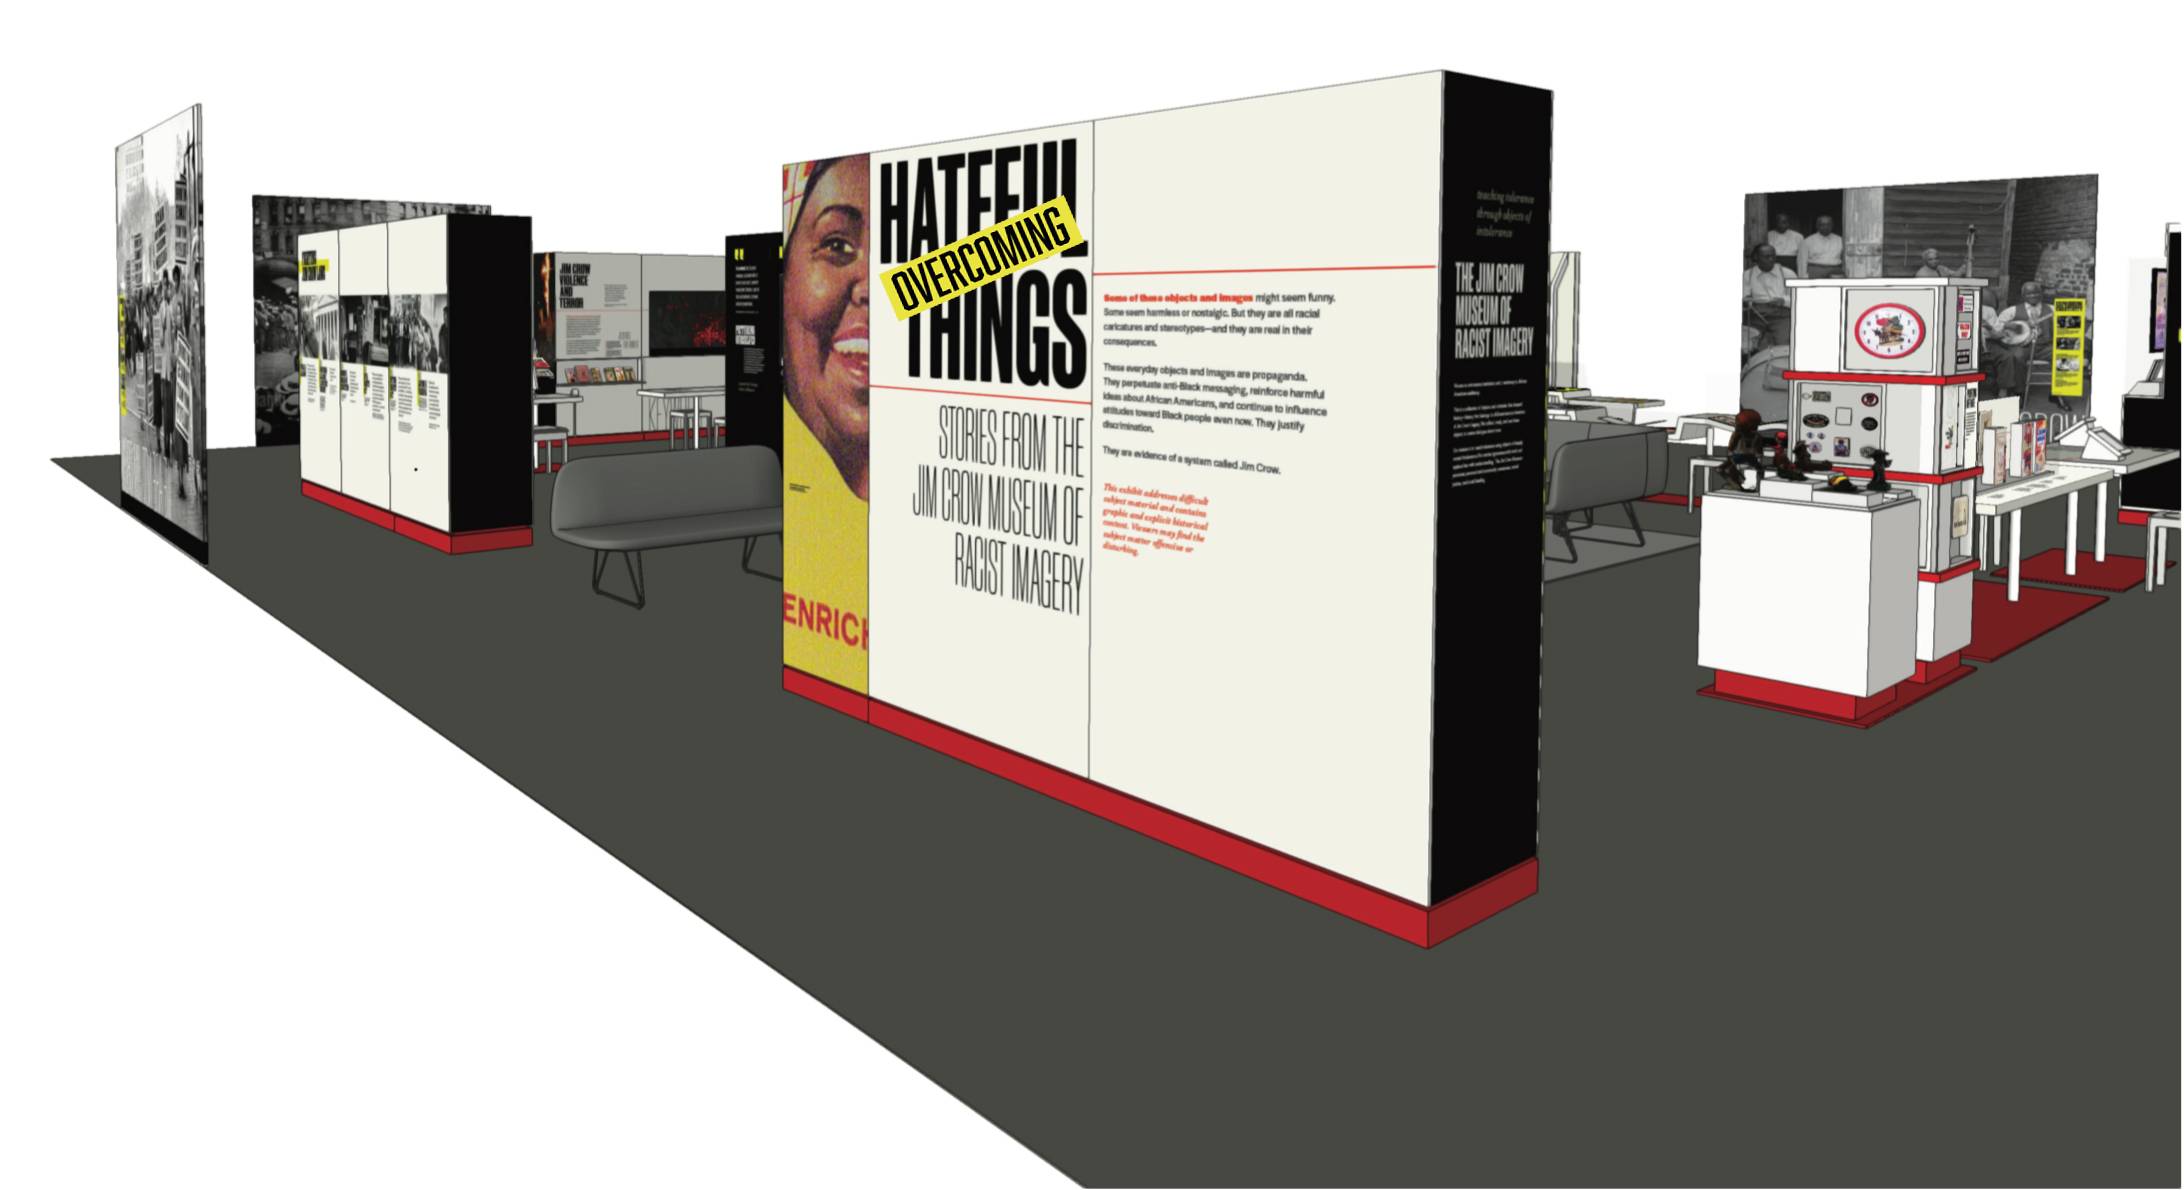 Traveling Exhibition - Hateful Things